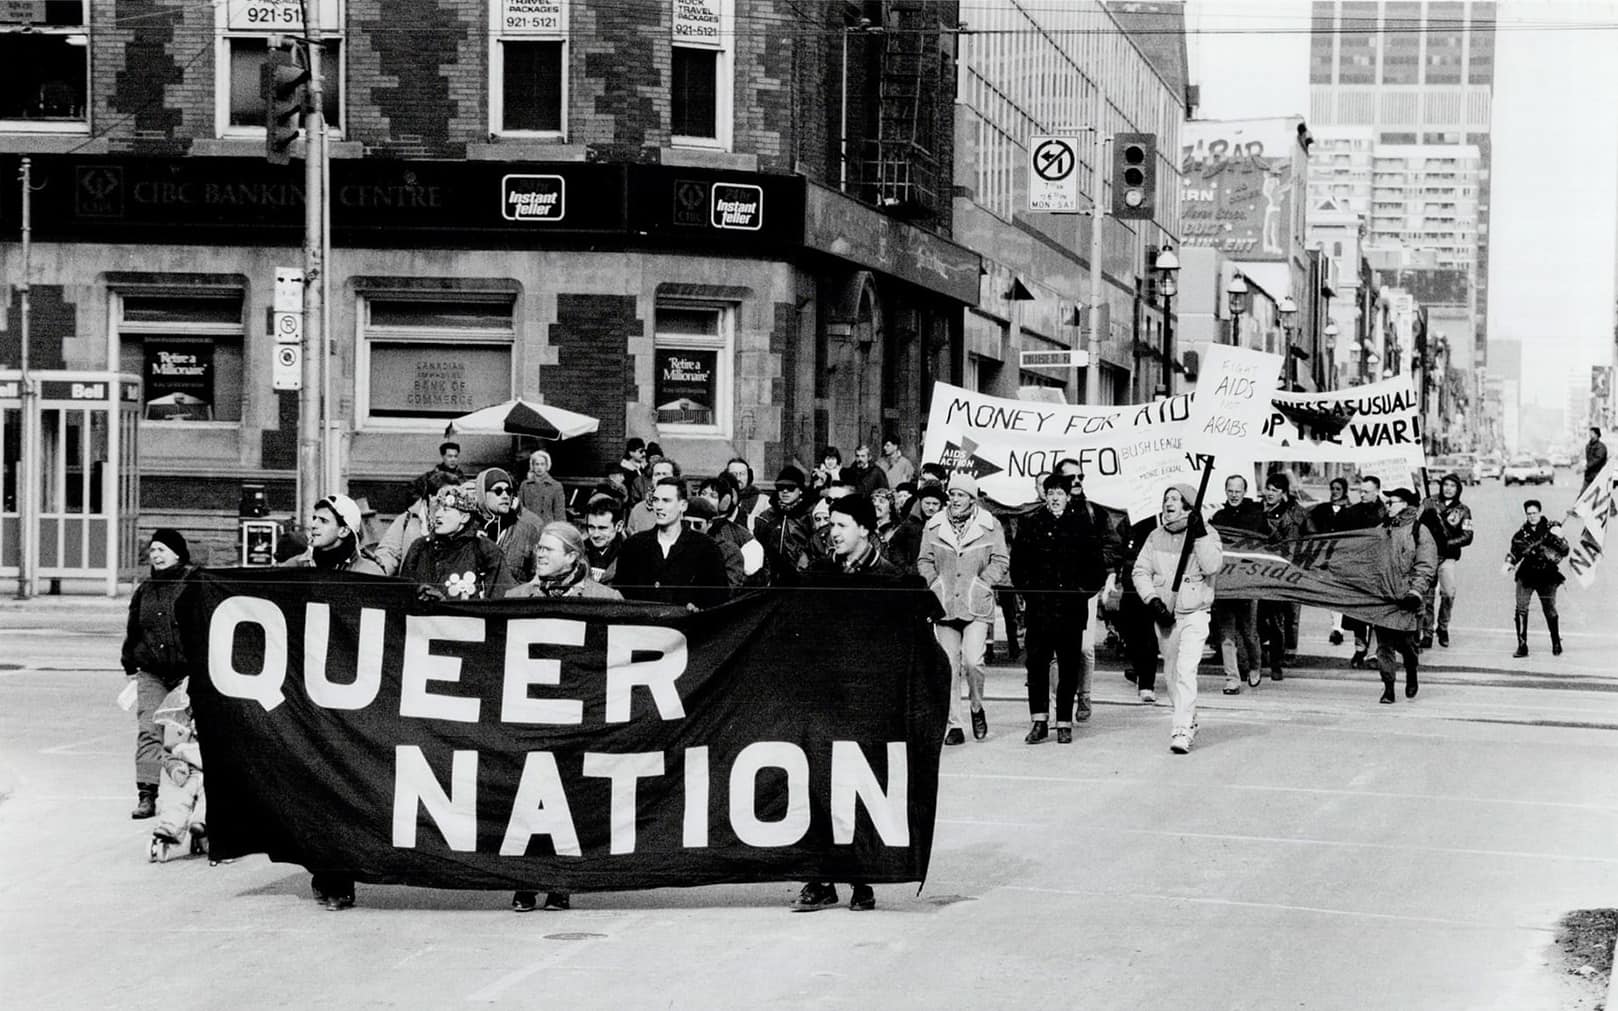 Queer nation